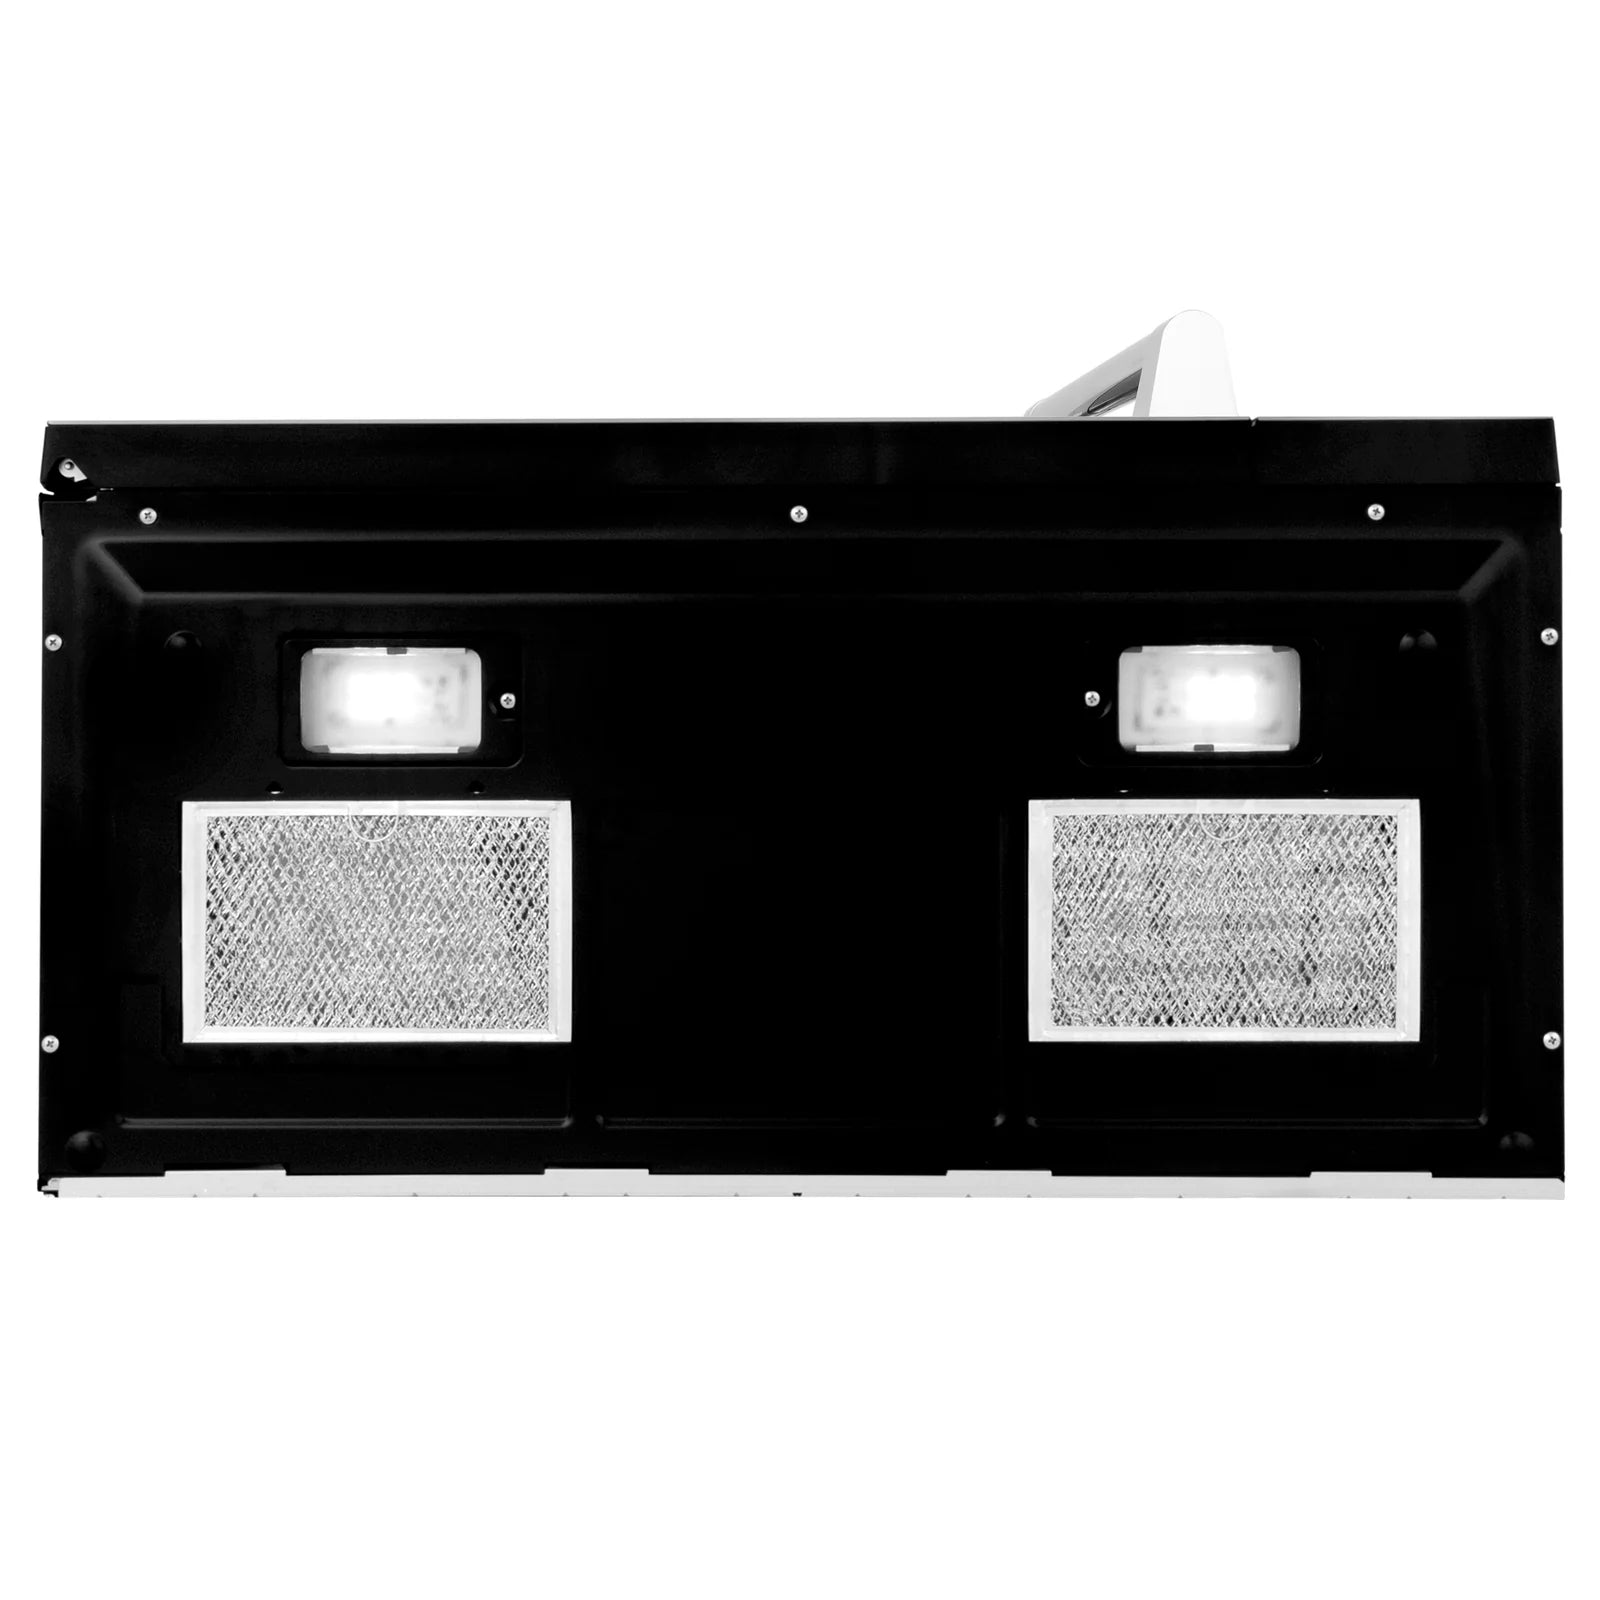 ZLINE 30-Inch 1.5 cu. ft. Over the Range Microwave in Stainless Steel with Traditional Handle and Set of 2 Charcoal Filters - MWO-OTRCFH-30